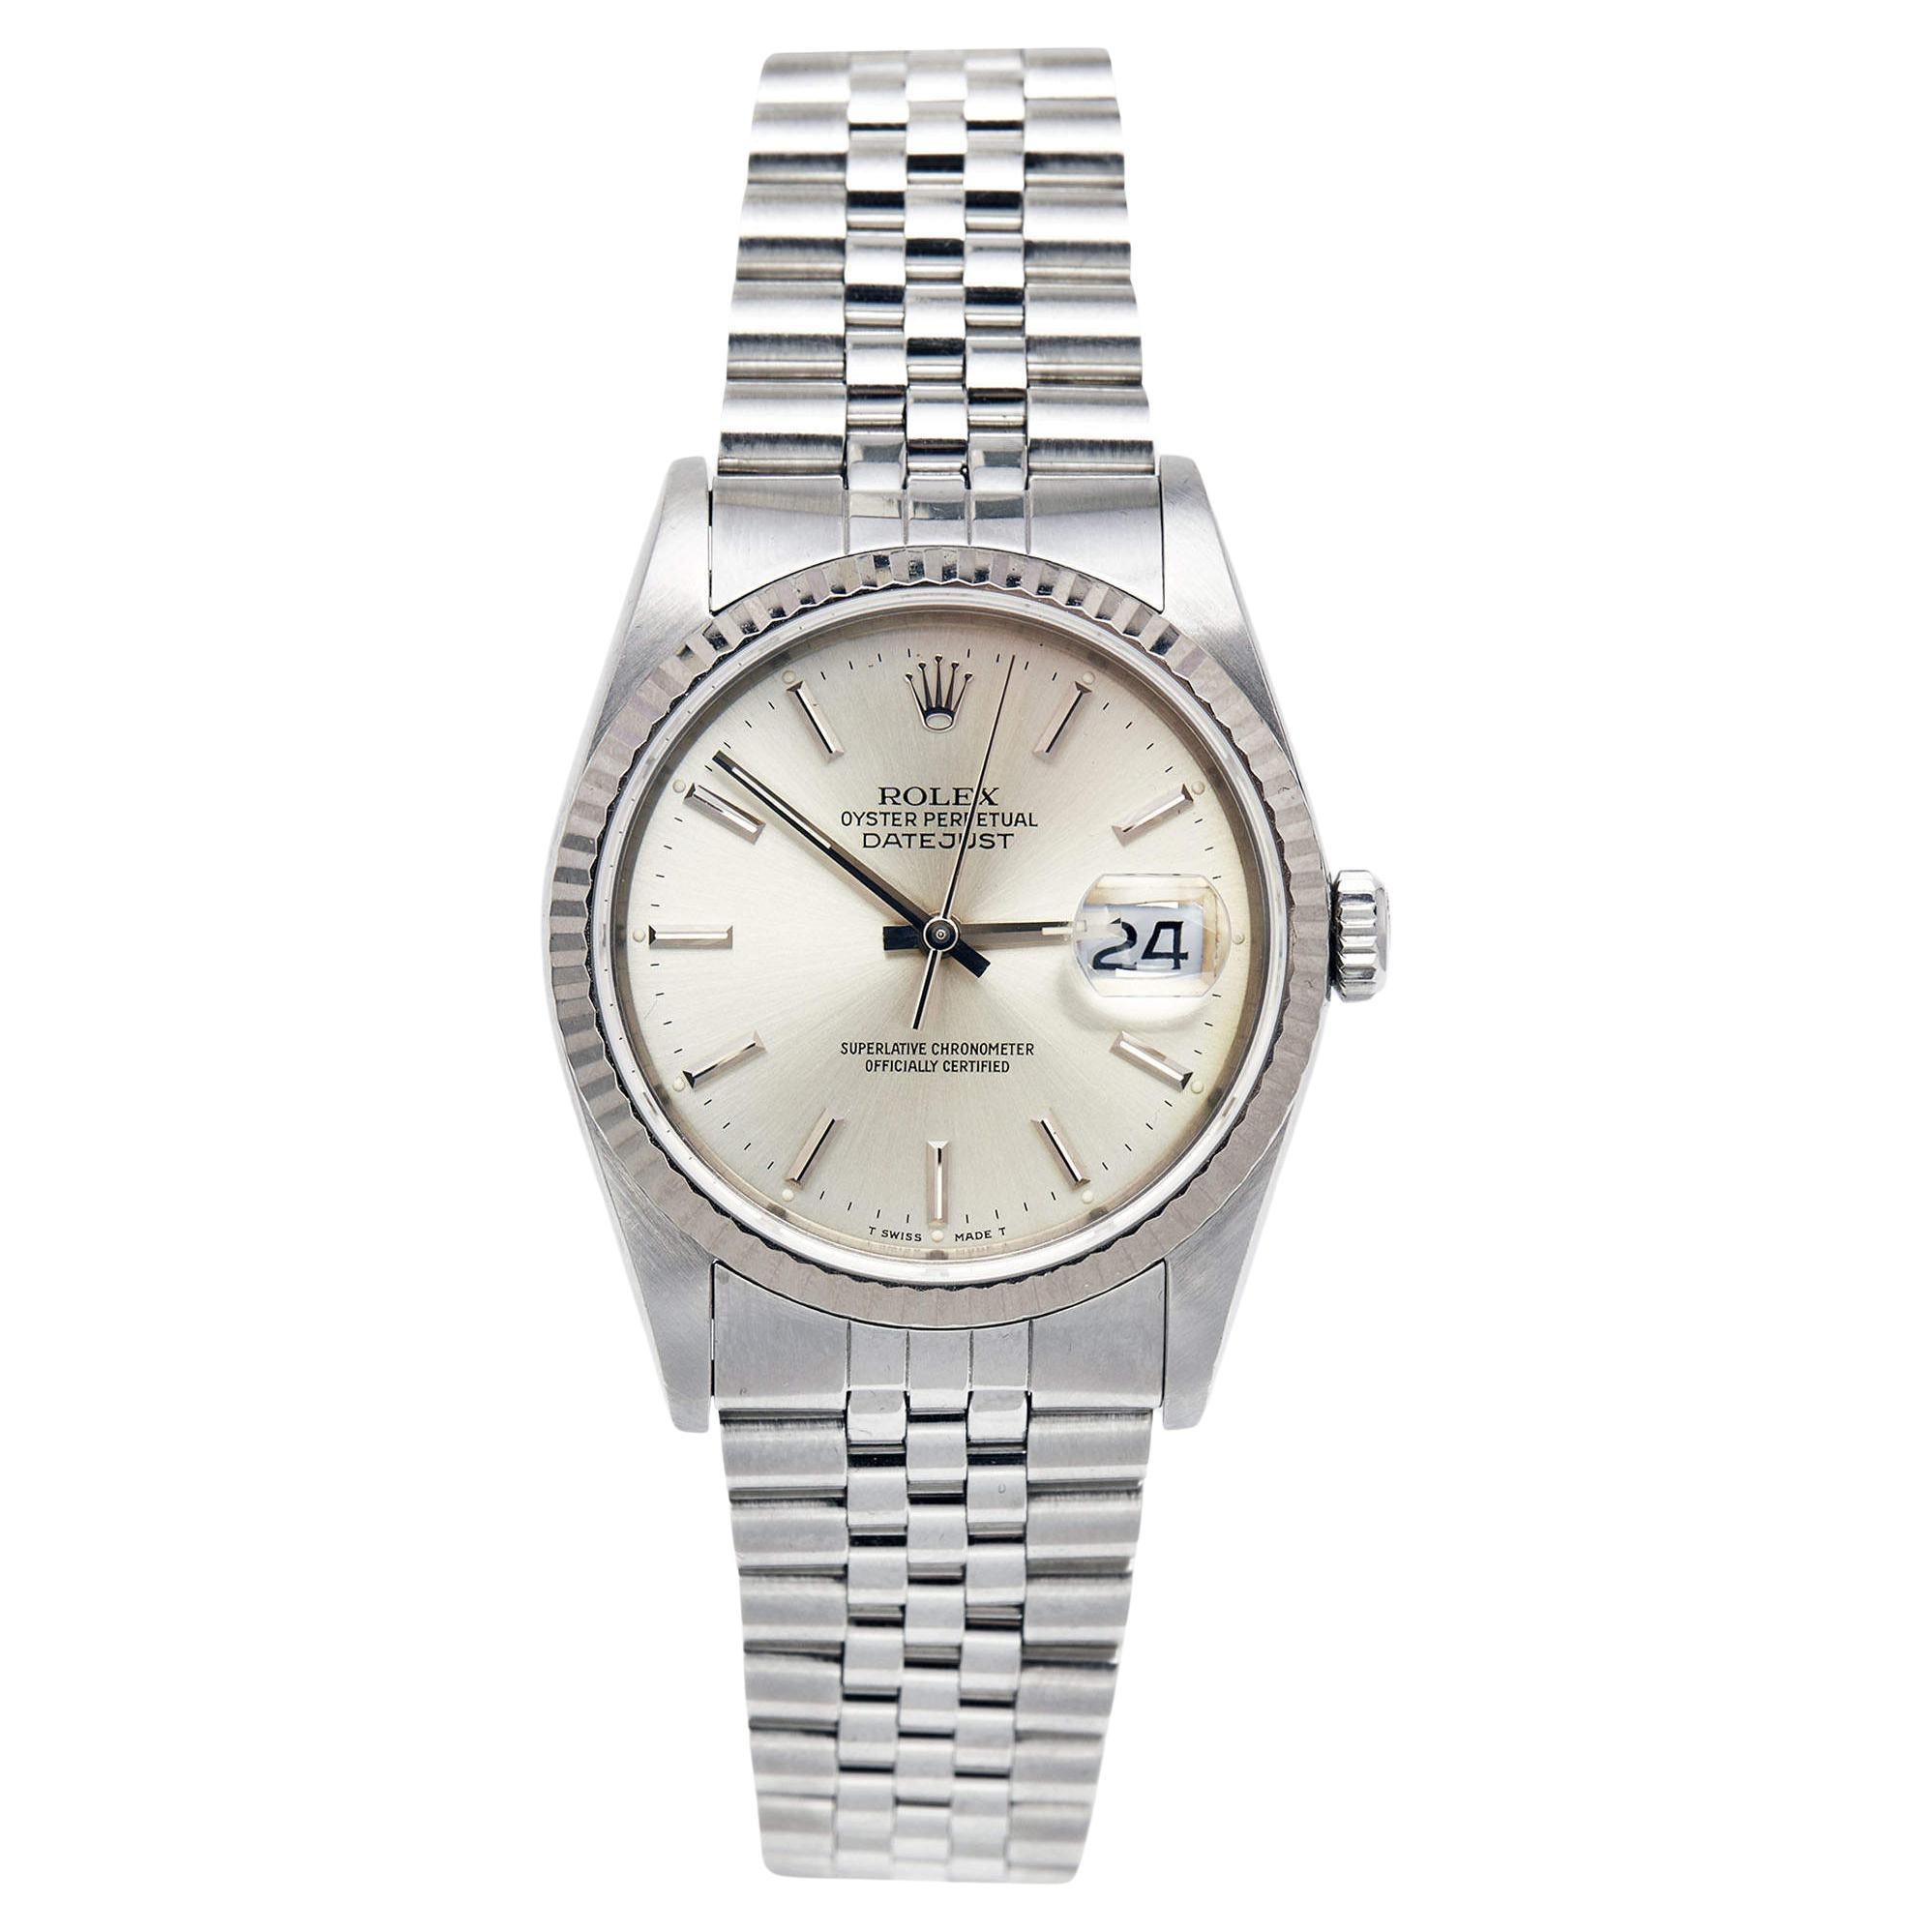 Rolex Silver 18k White Gold Stainless Steel Datejust 16234 Men's Wristwatch 36 m For Sale